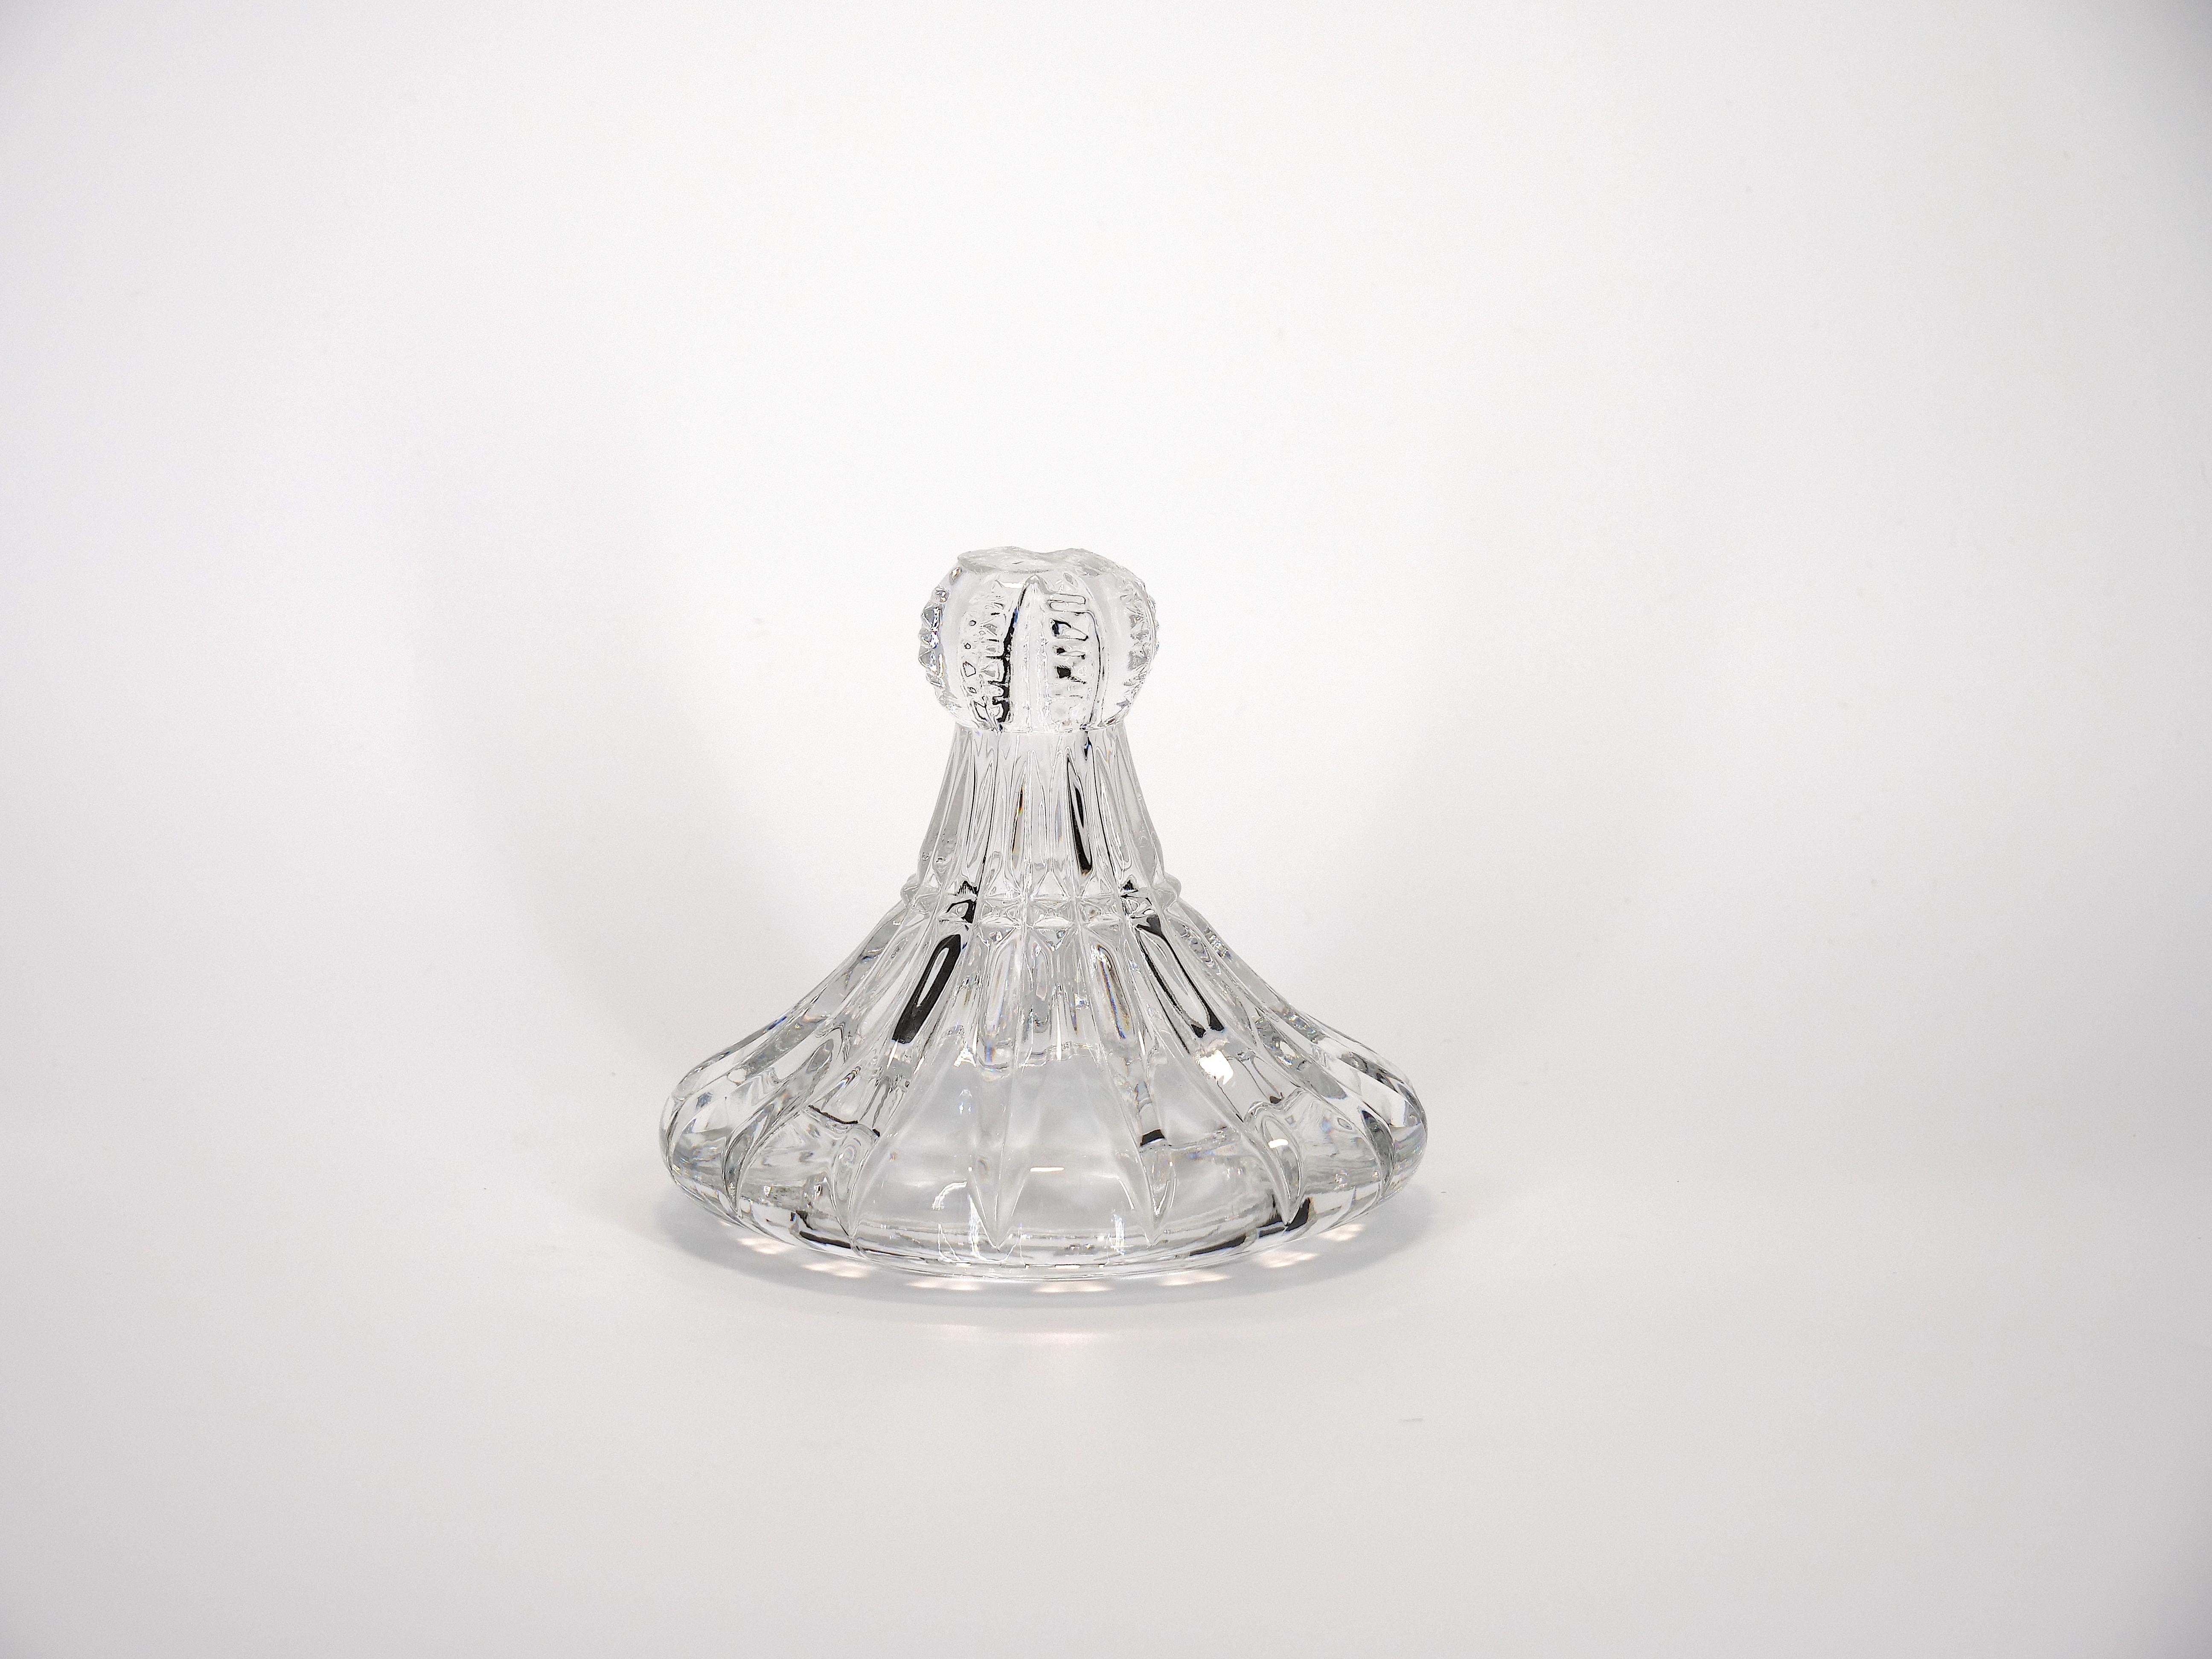 French cut crystal tall covered decorative piece / urn. The piece features and exterior cut crystal design details resting on a round form pedestal base. The piece is in great condition. Minor wear/ roughness to the covered top. Maker's mark